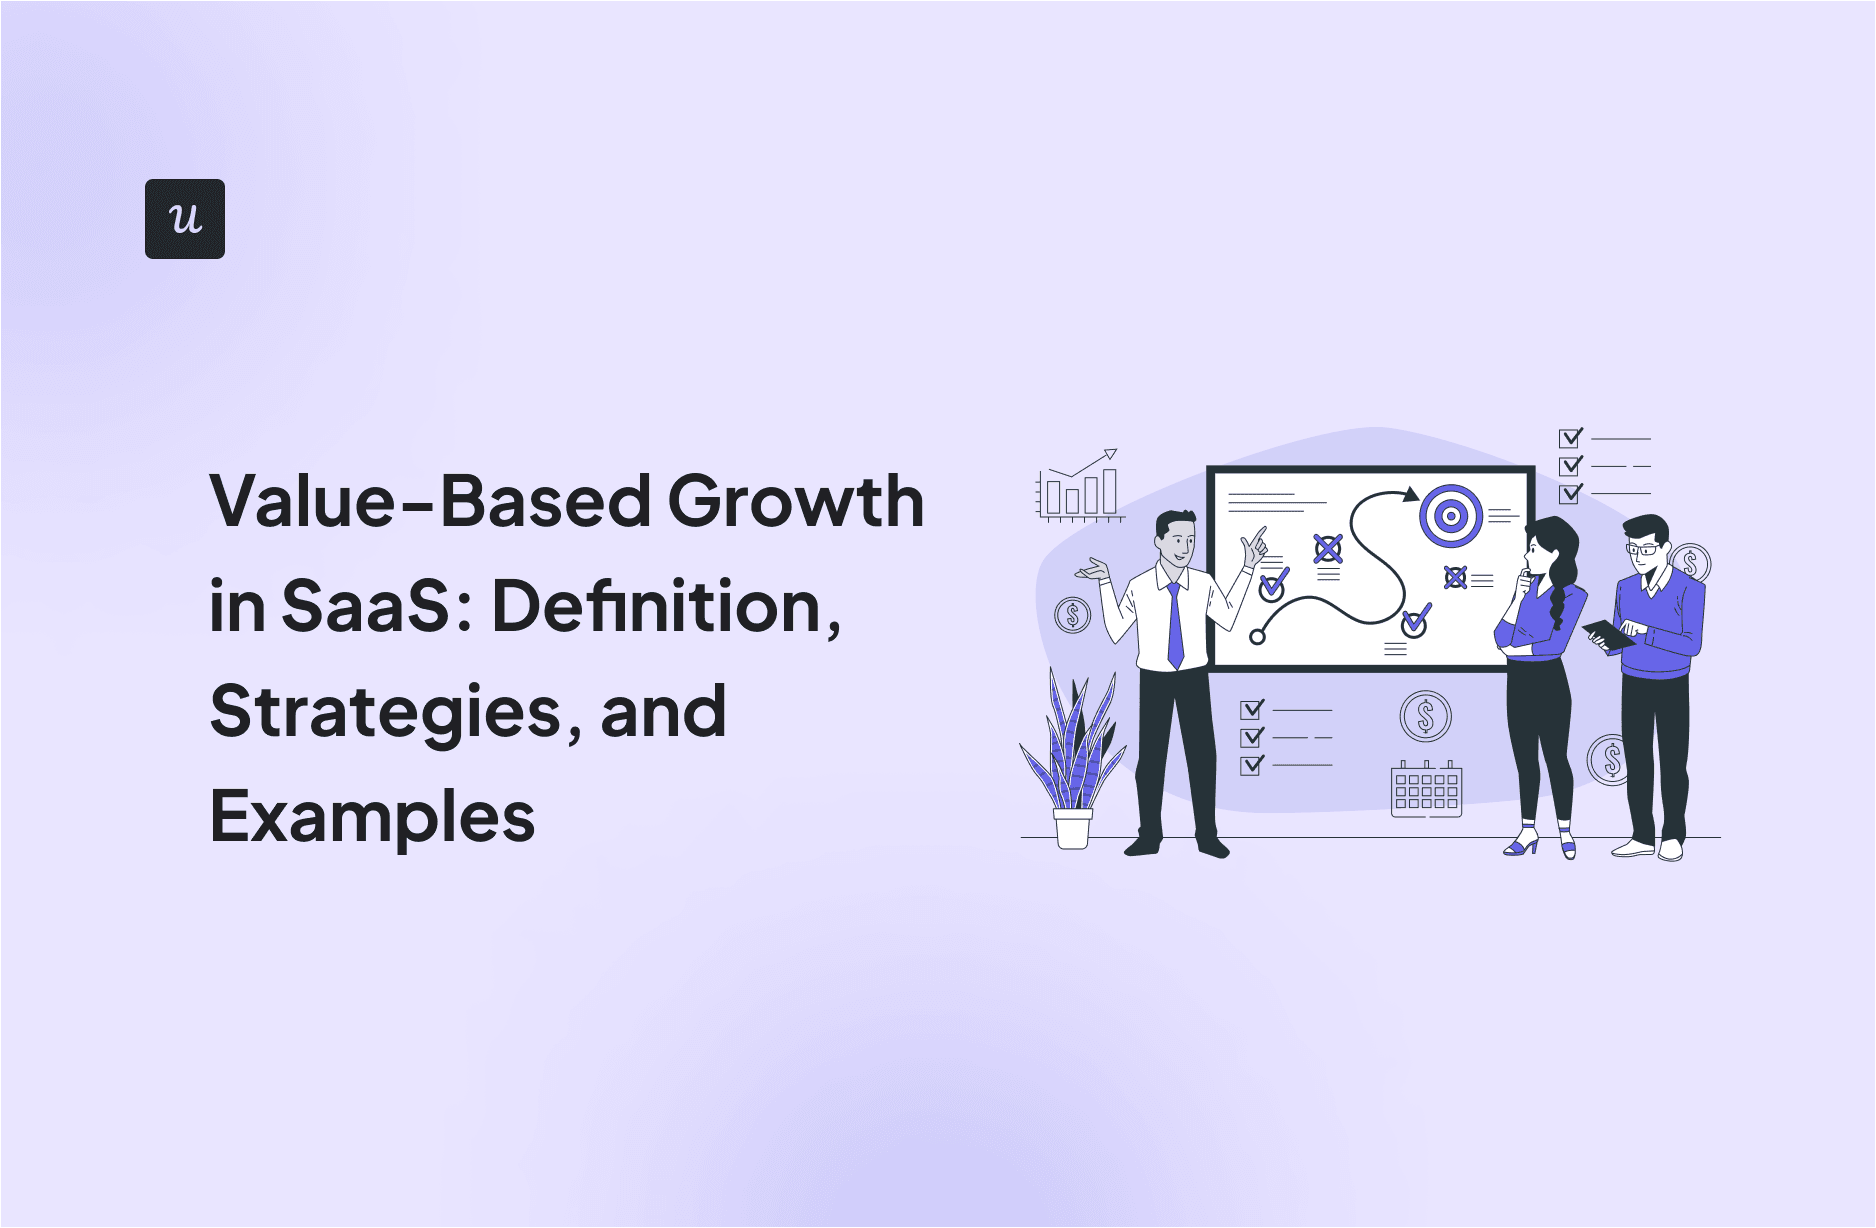 Value-Based Growth in SaaS: Definition, Strategies, and Examples cover